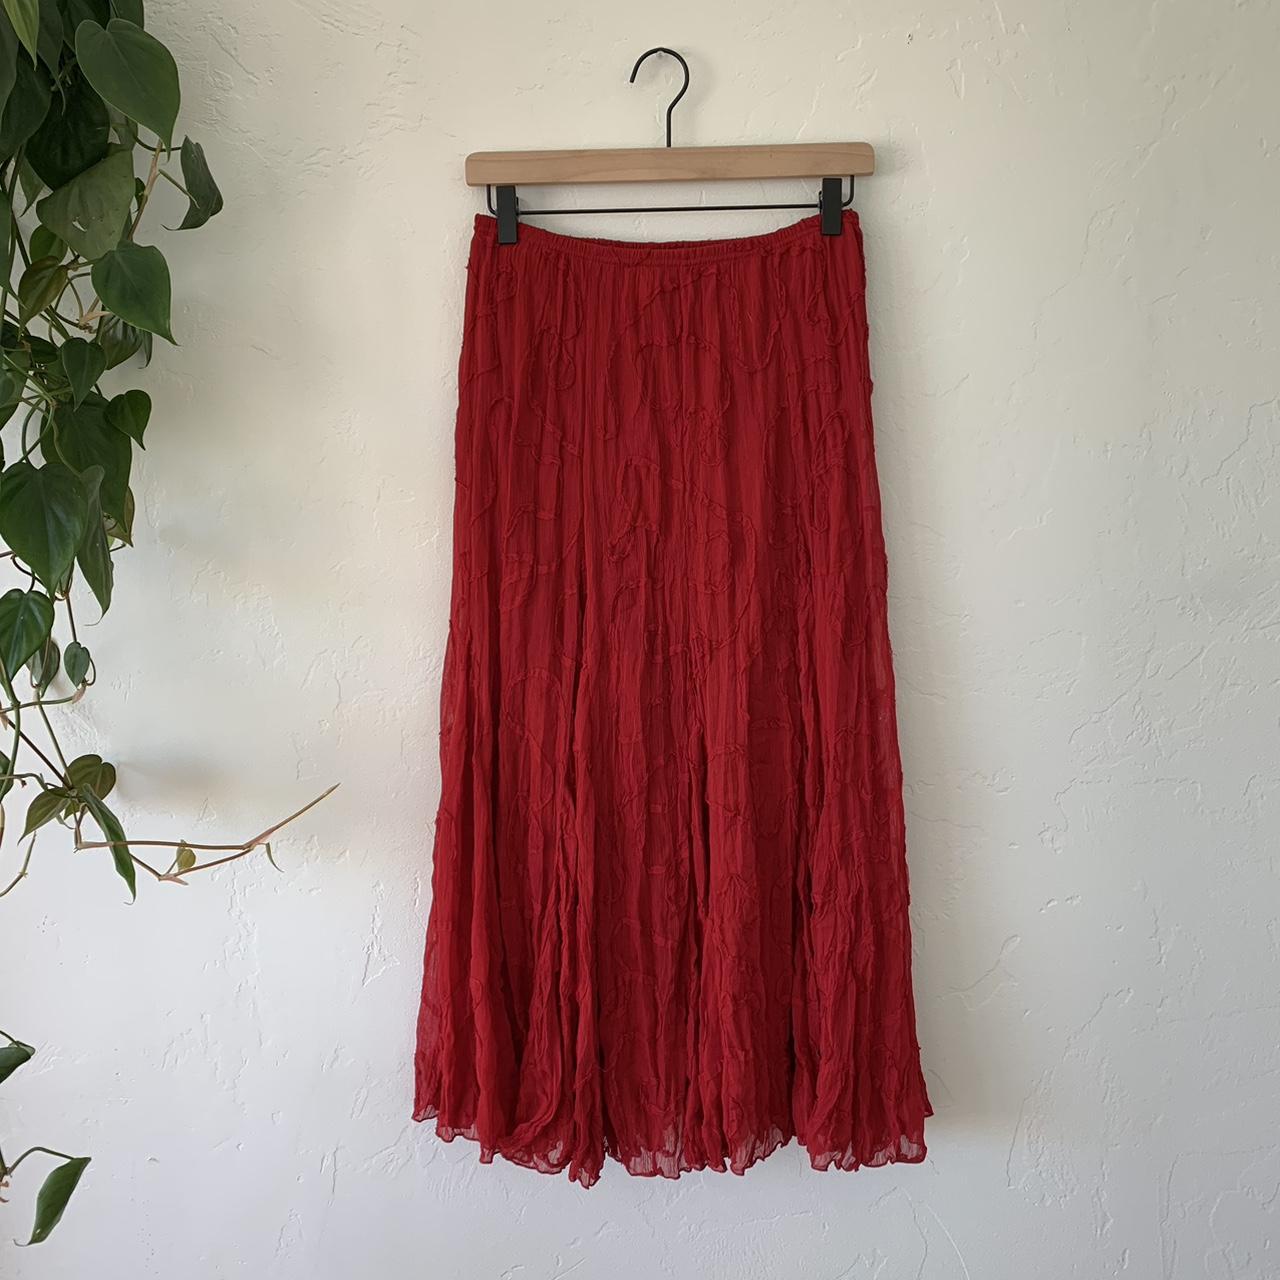 vintage 90s flowy red maxi skirt This perfect... - Depop